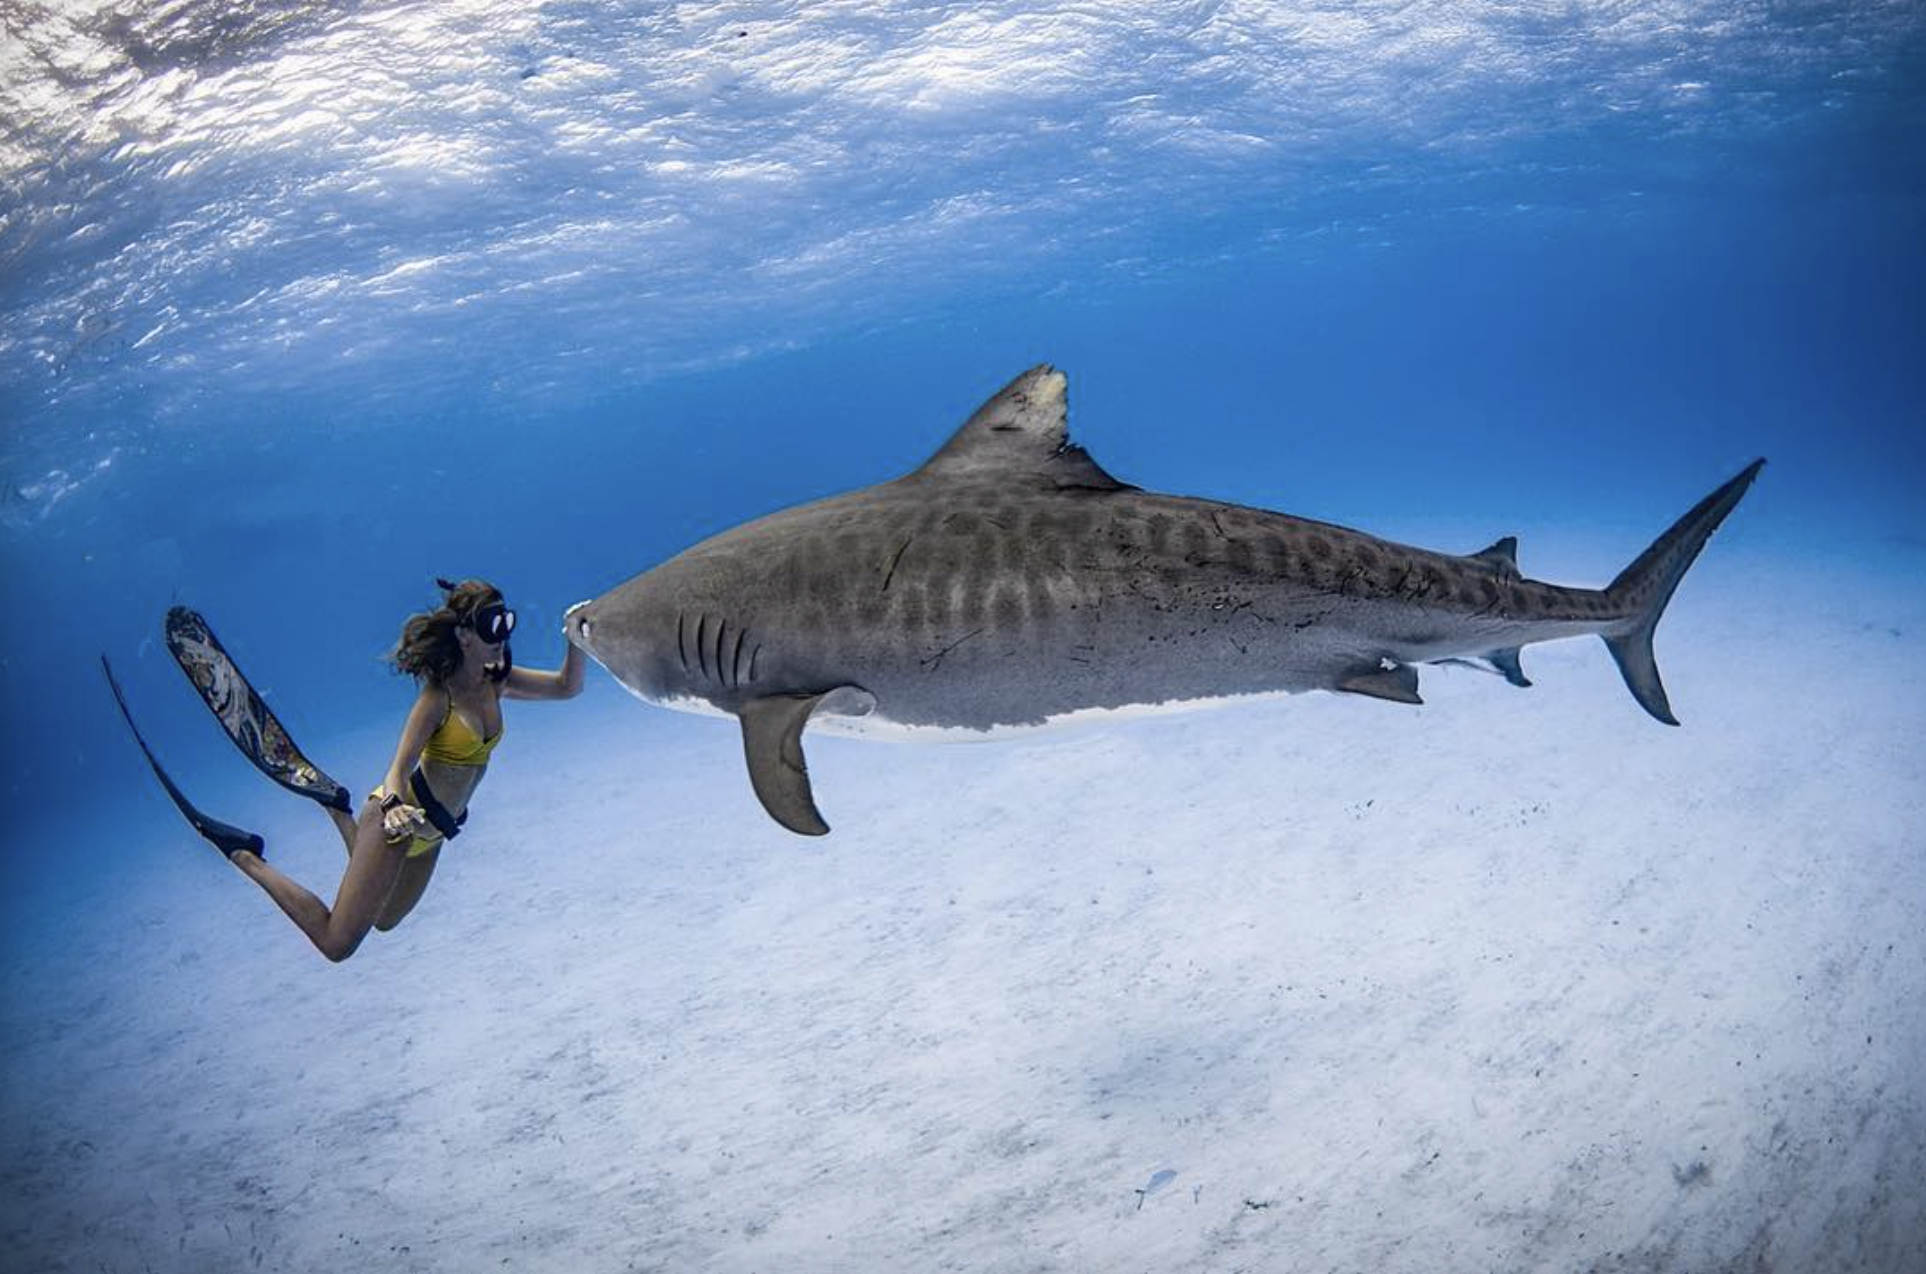 Steph Schuldt A Fearless Freediving